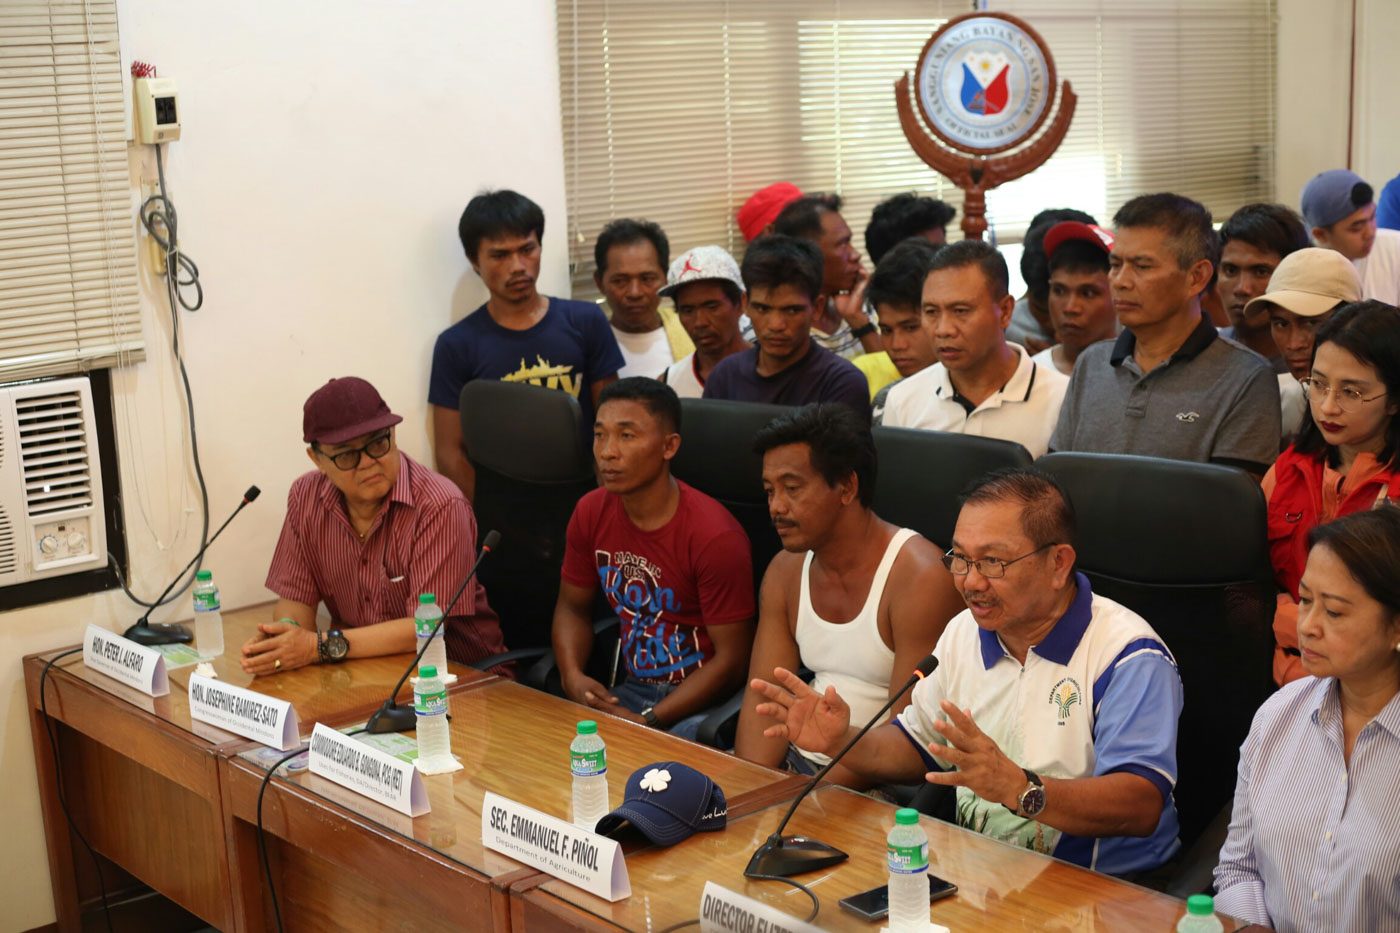 PH boat captain changes tune after meeting with Piñol